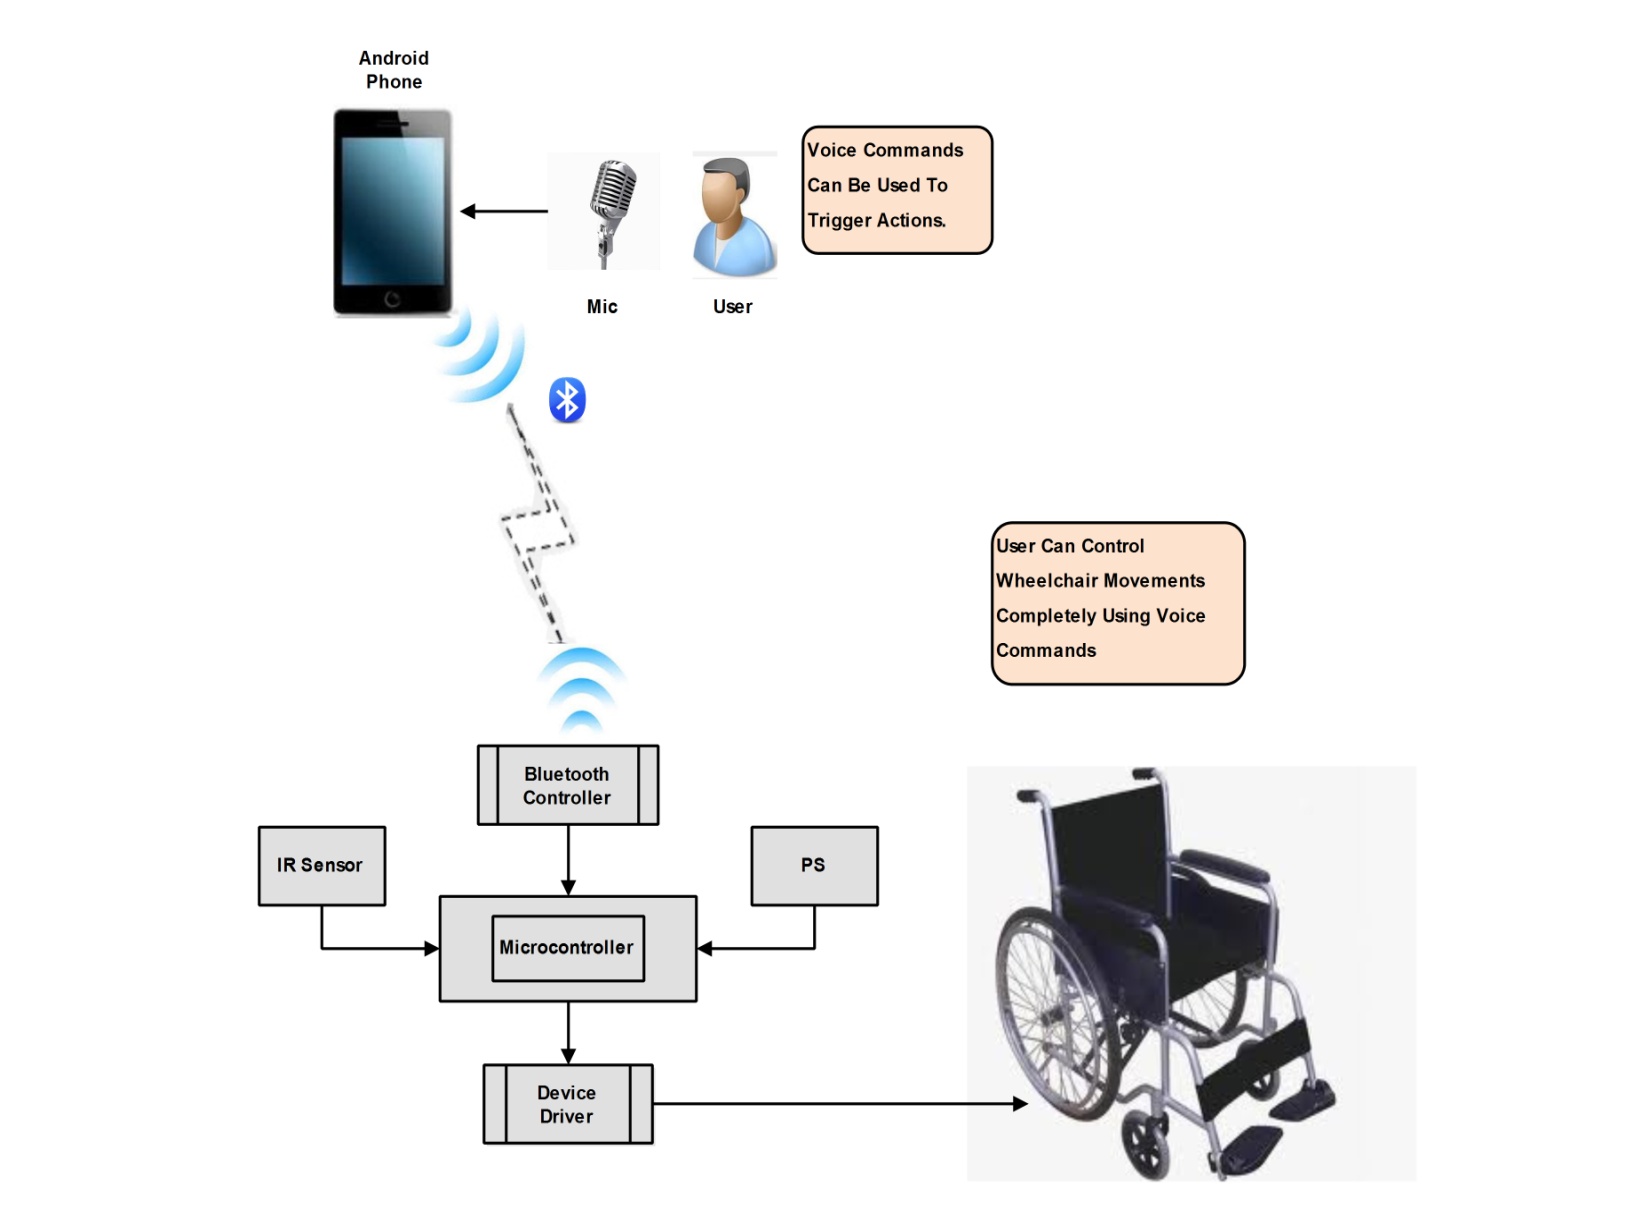 c:\users\jb\desktop\final project pdf\images of project\10545 android based wheel chair.(only voice input).jpg